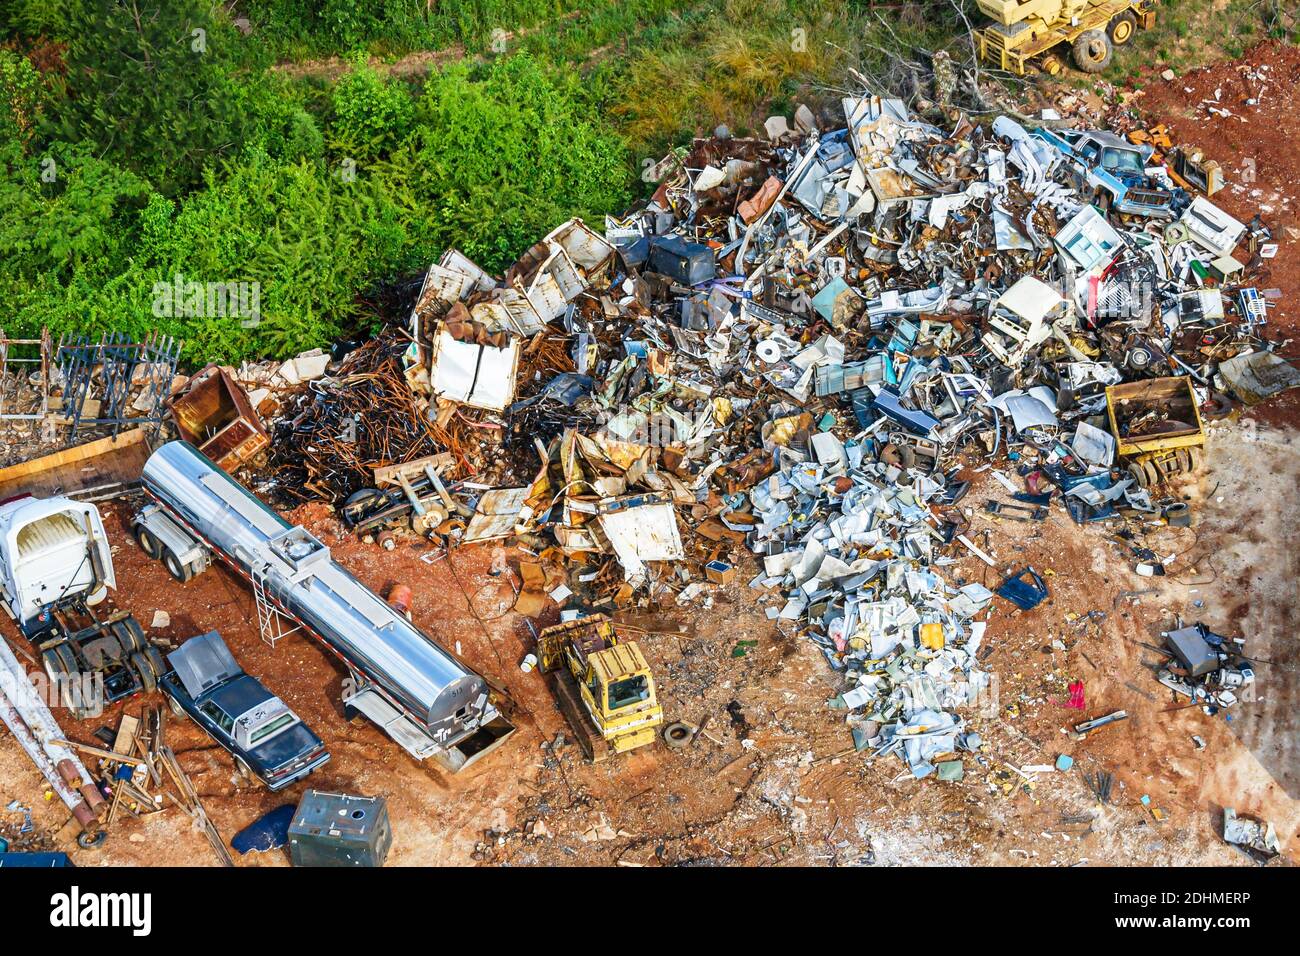 Alabama Decatur junkyard recycled recycling trash salvage aerial view, Stock Photo